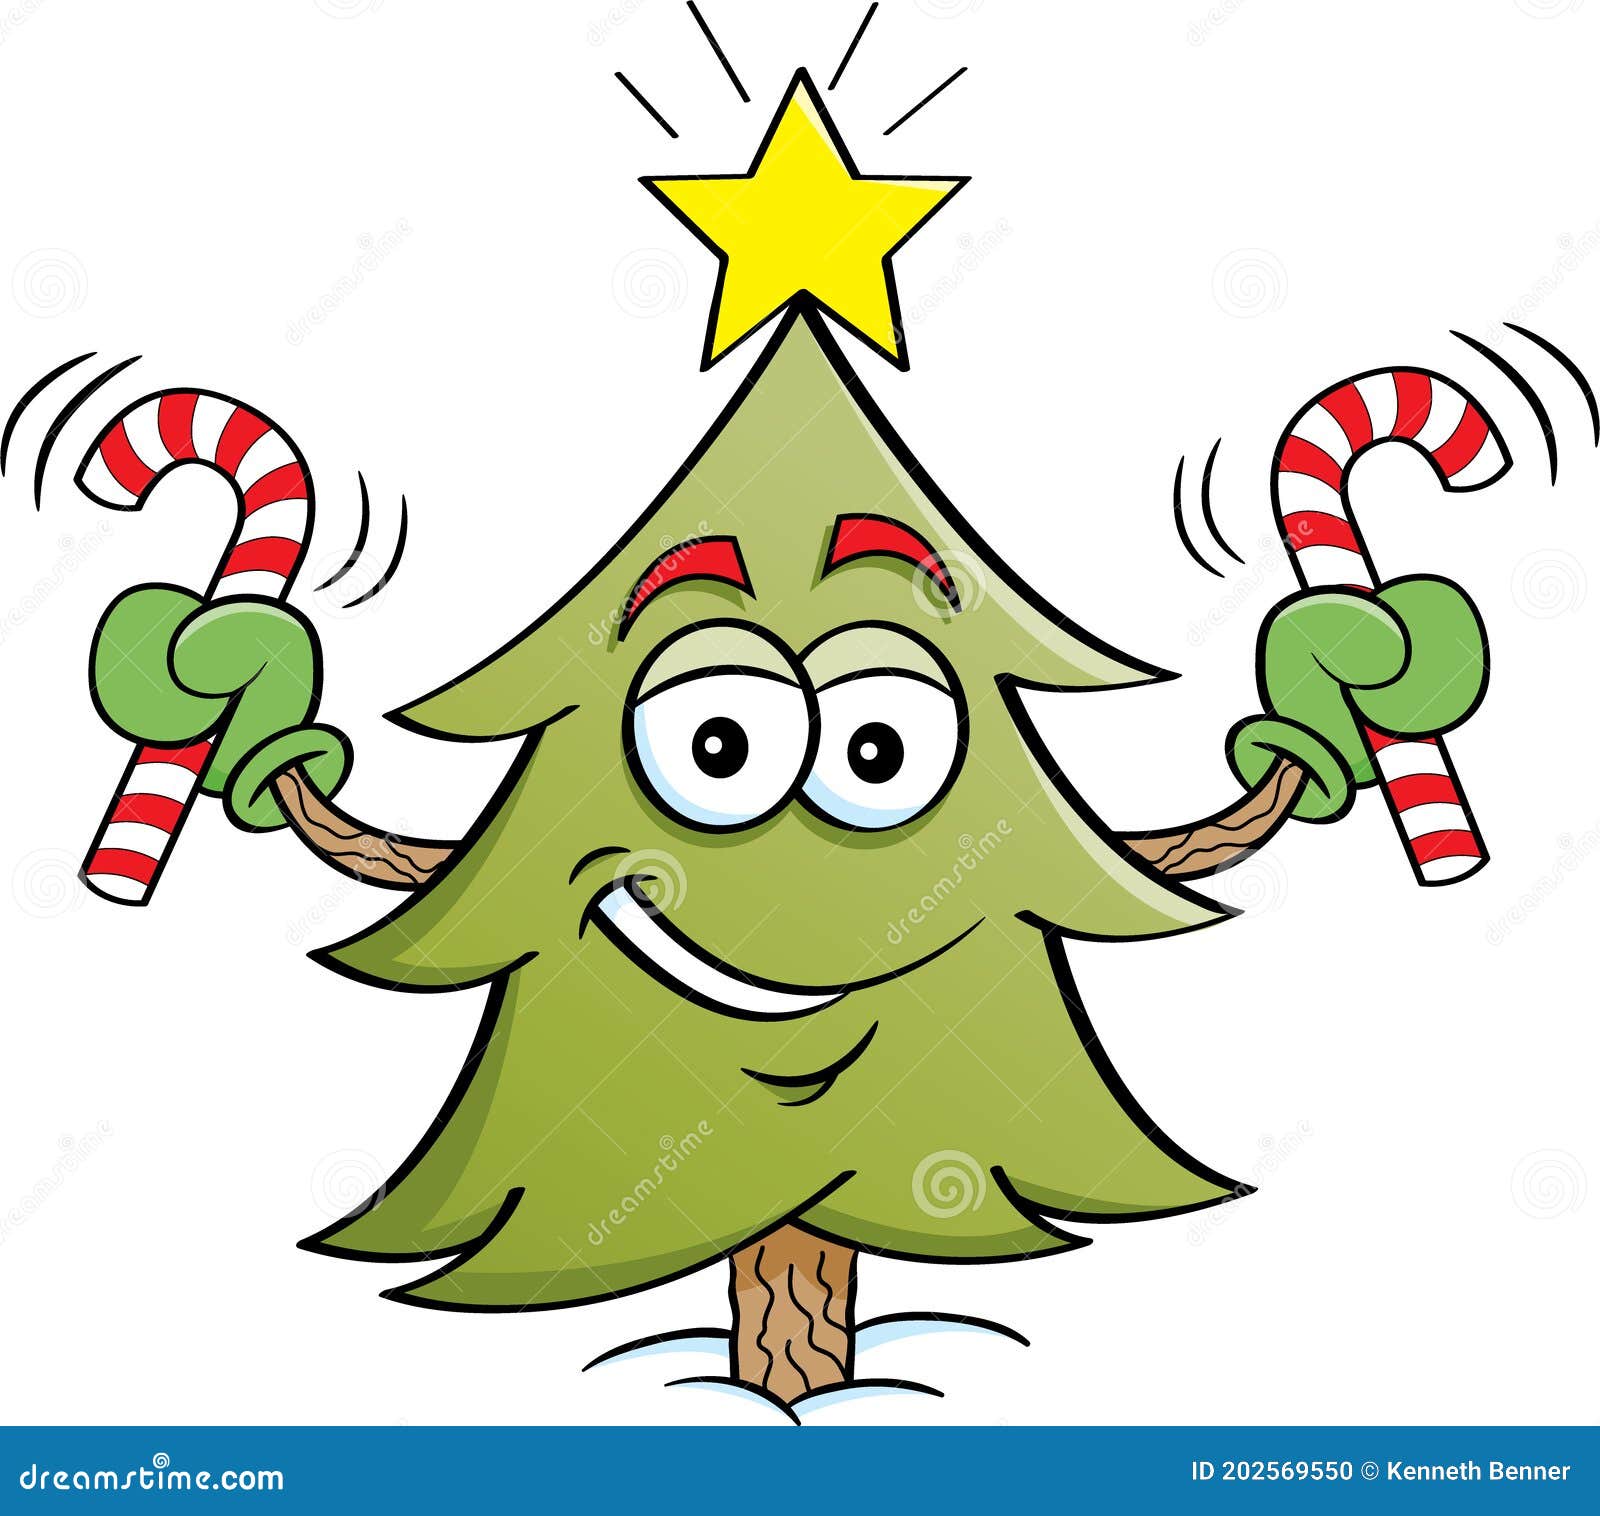 Cartoon Smiling Pine Tree Holding Candy Canes. Stock Vector ...